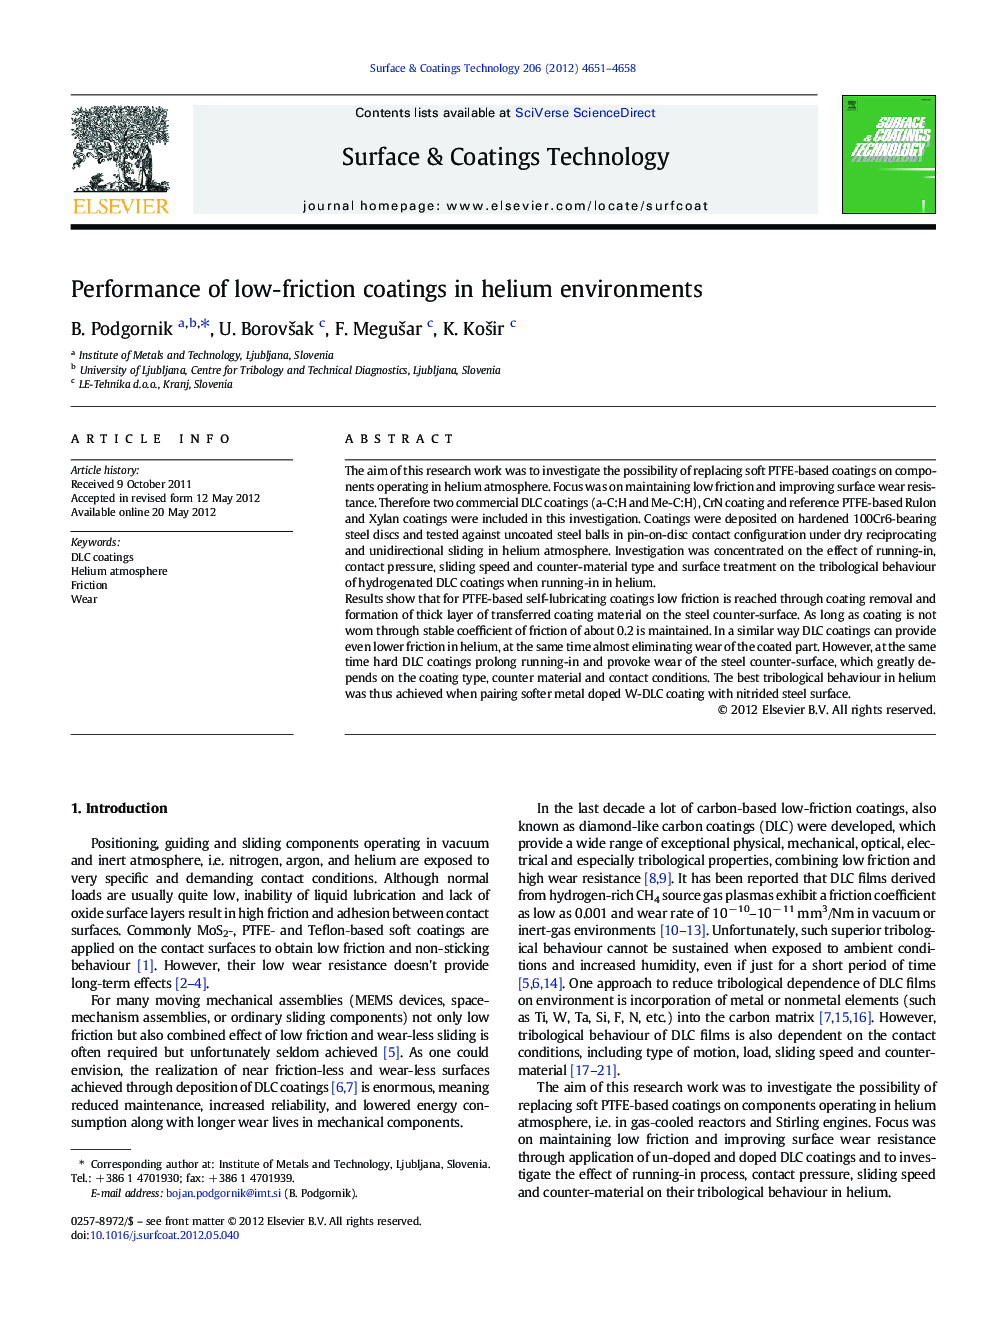 Performance of low-friction coatings in helium environments